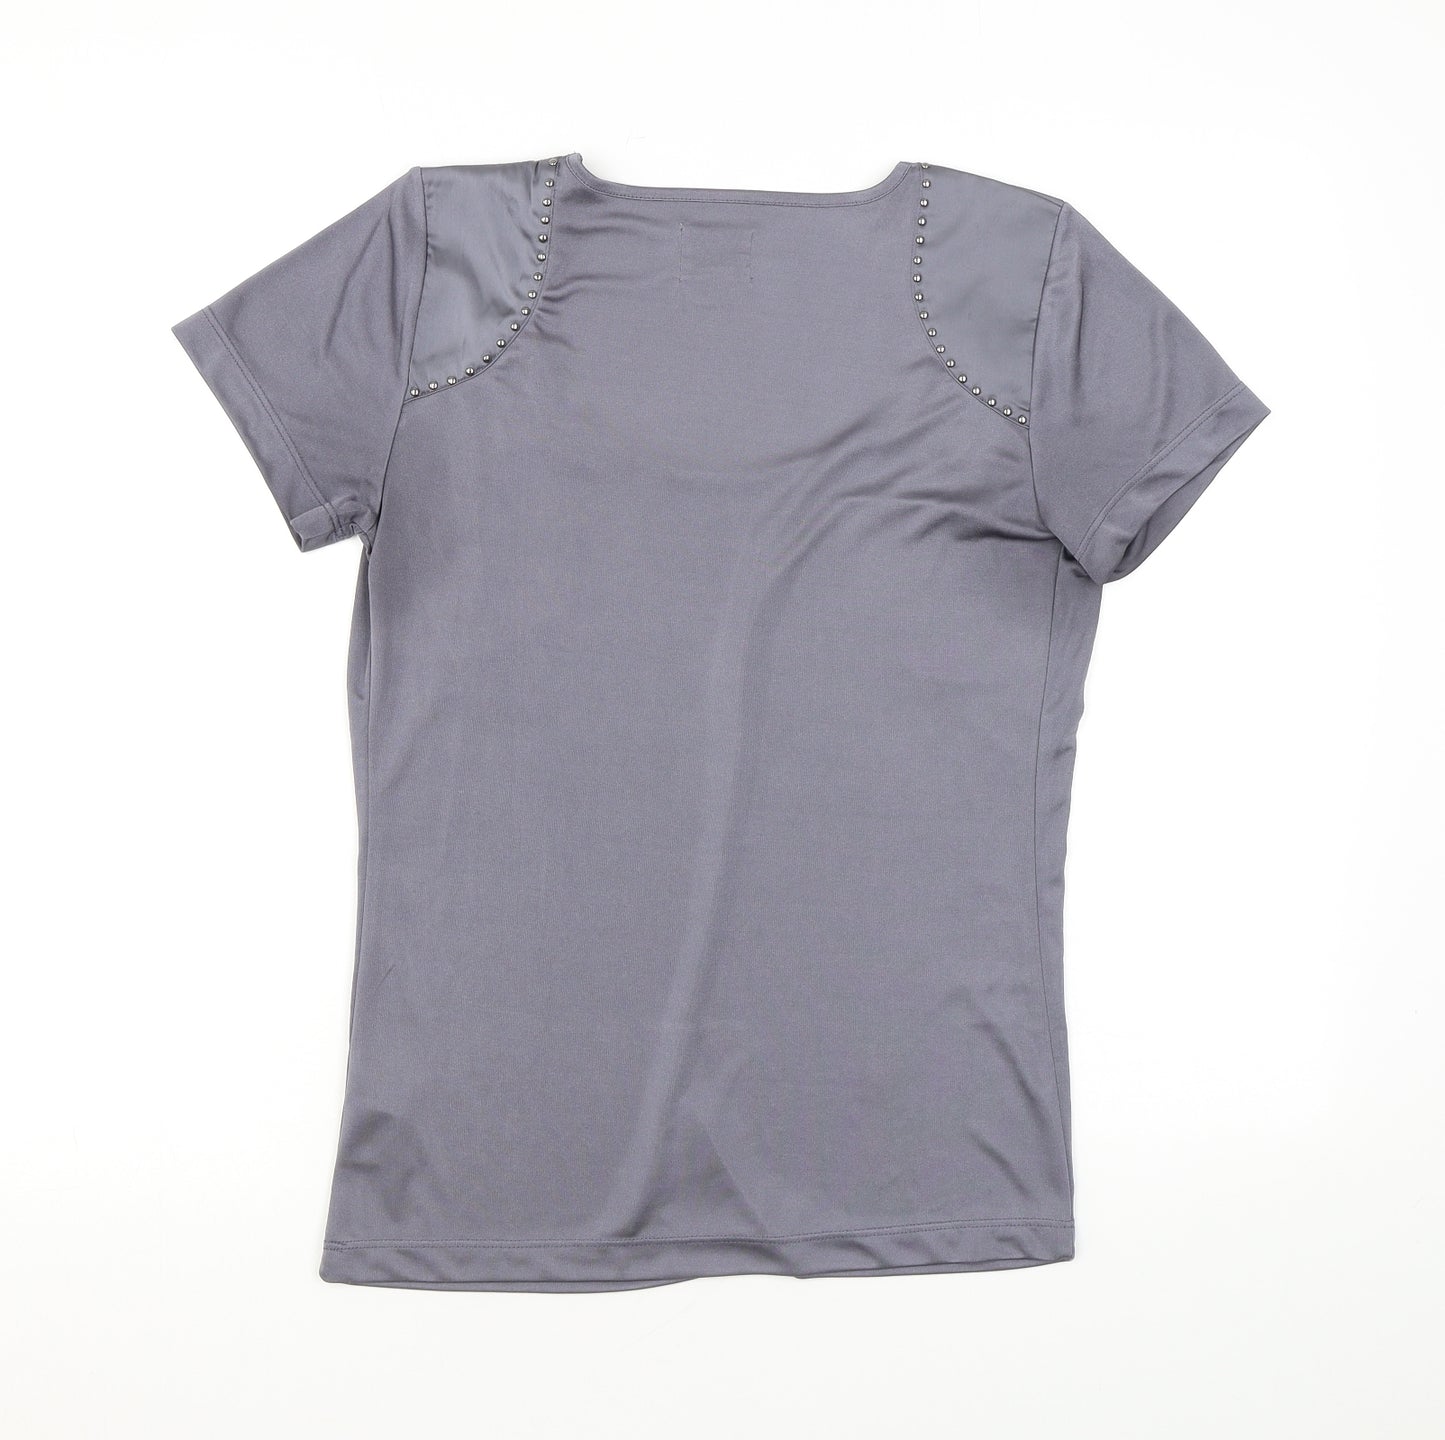 Reiss Womens Grey Polyester Basic T-Shirt Size S Scoop Neck - Studs